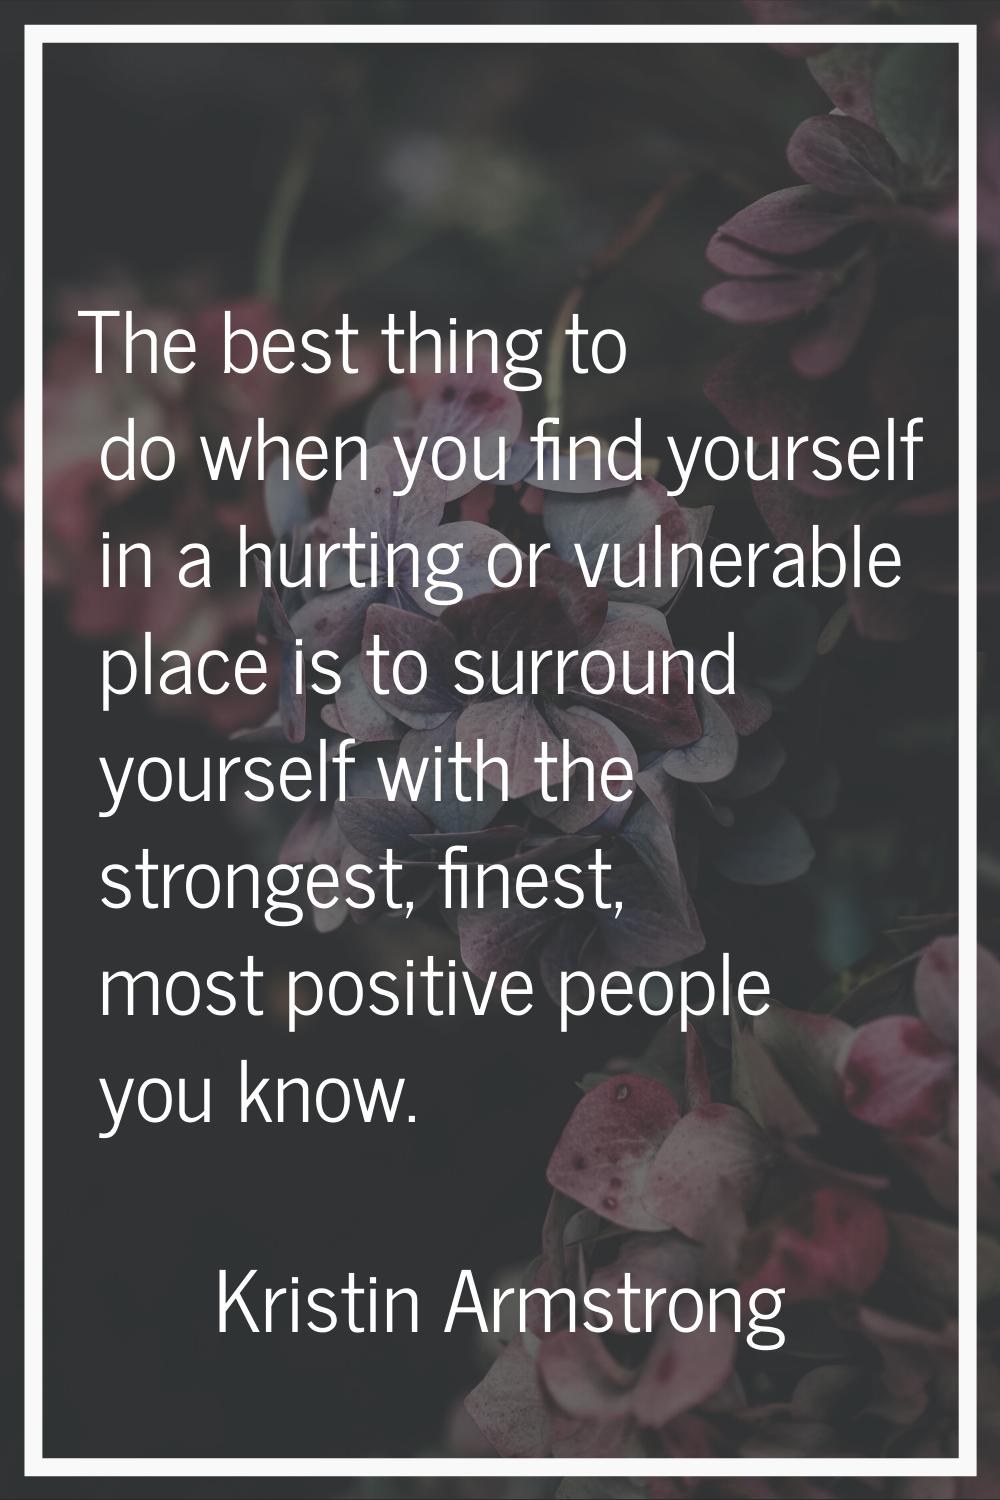 The best thing to do when you find yourself in a hurting or vulnerable place is to surround yoursel